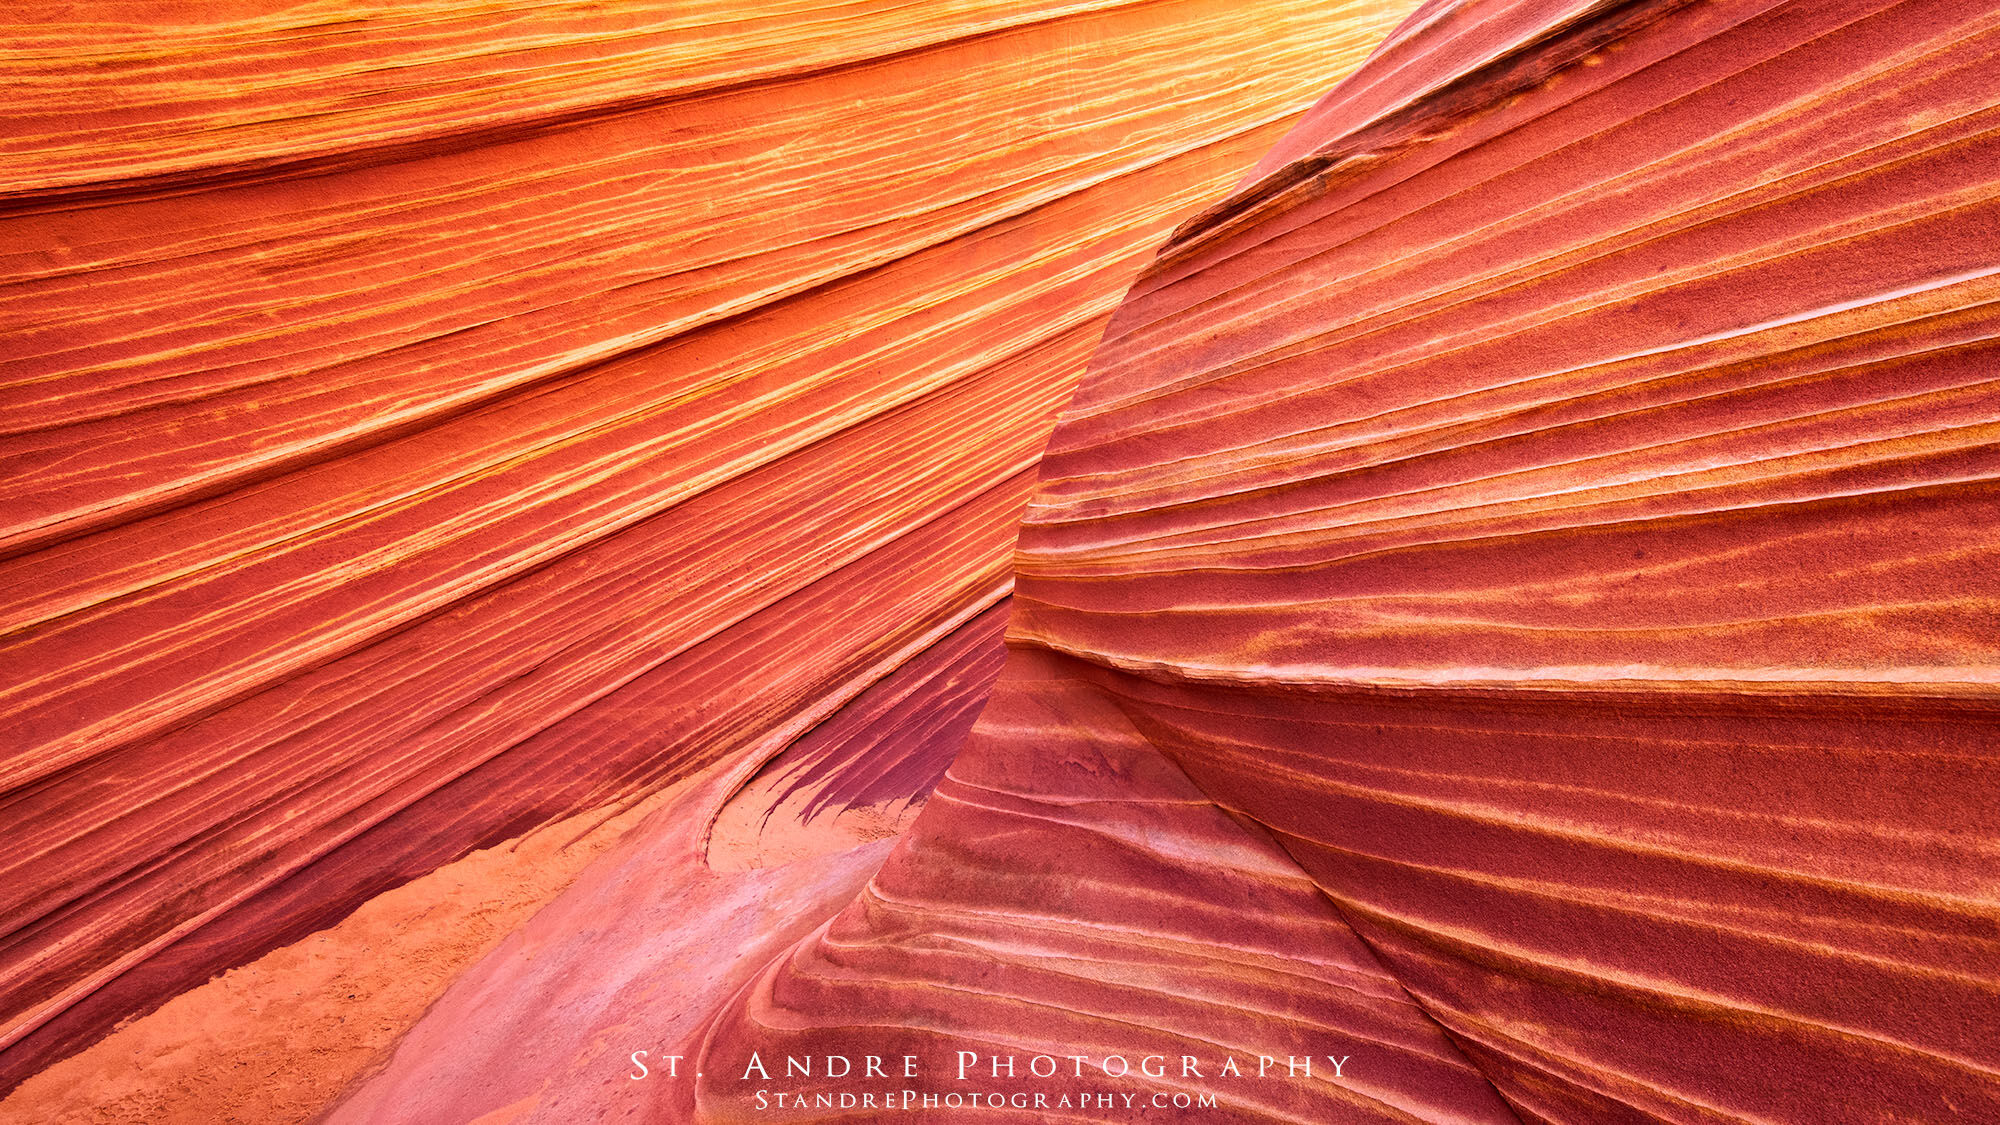 A slot canyon in the Wave in Arizona. Dramatic stripes collide in this image. 